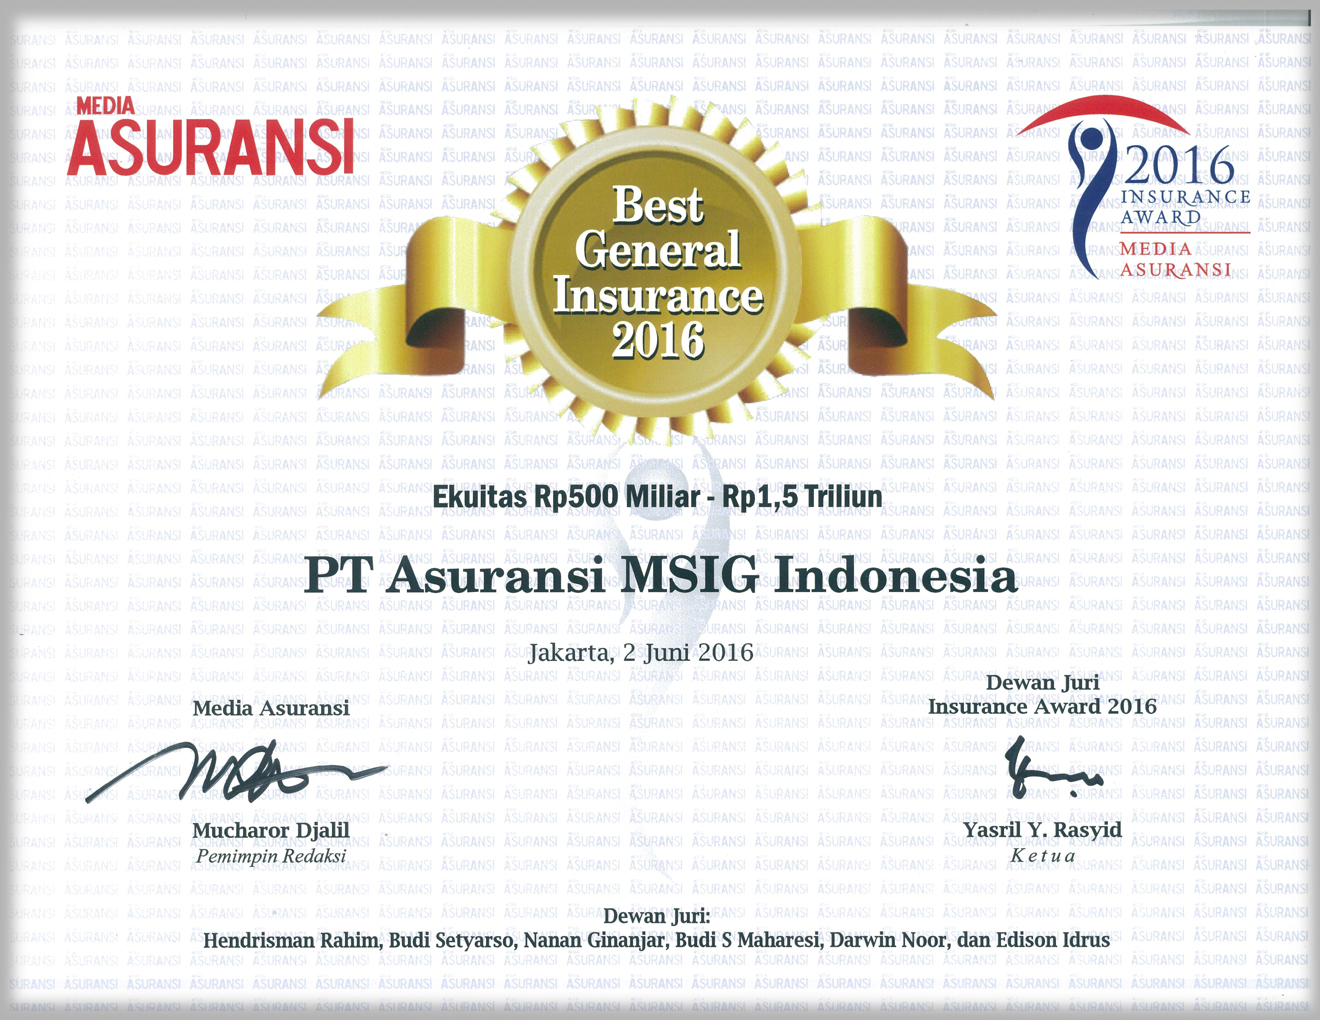 MSIG Indonesia Awarded 2nd Winner Of Best General Insurance 2016 From Media Asuransi